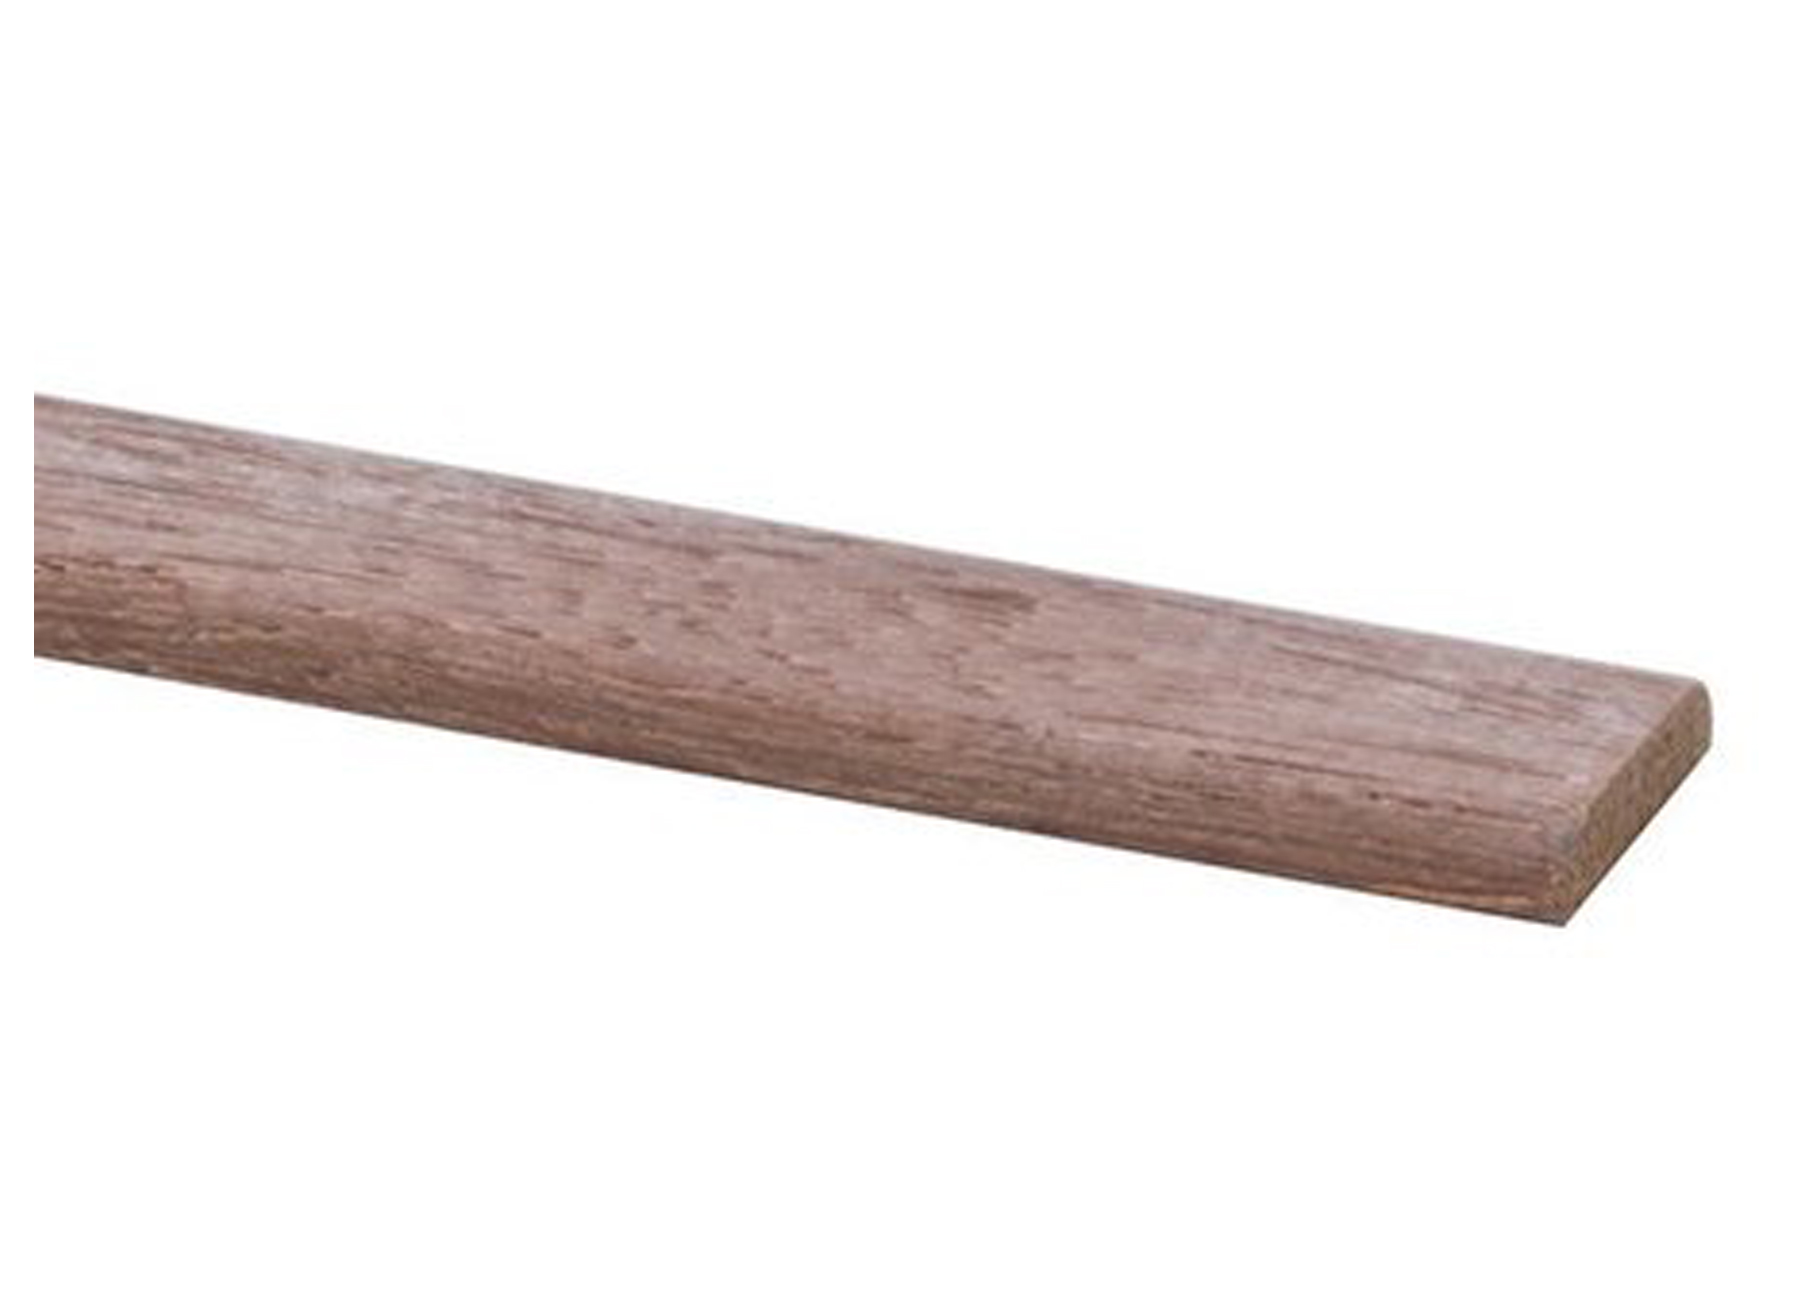 JEWE COUVRE-JOINT BOIS DUR CAMBARA 518 4X19MM 240